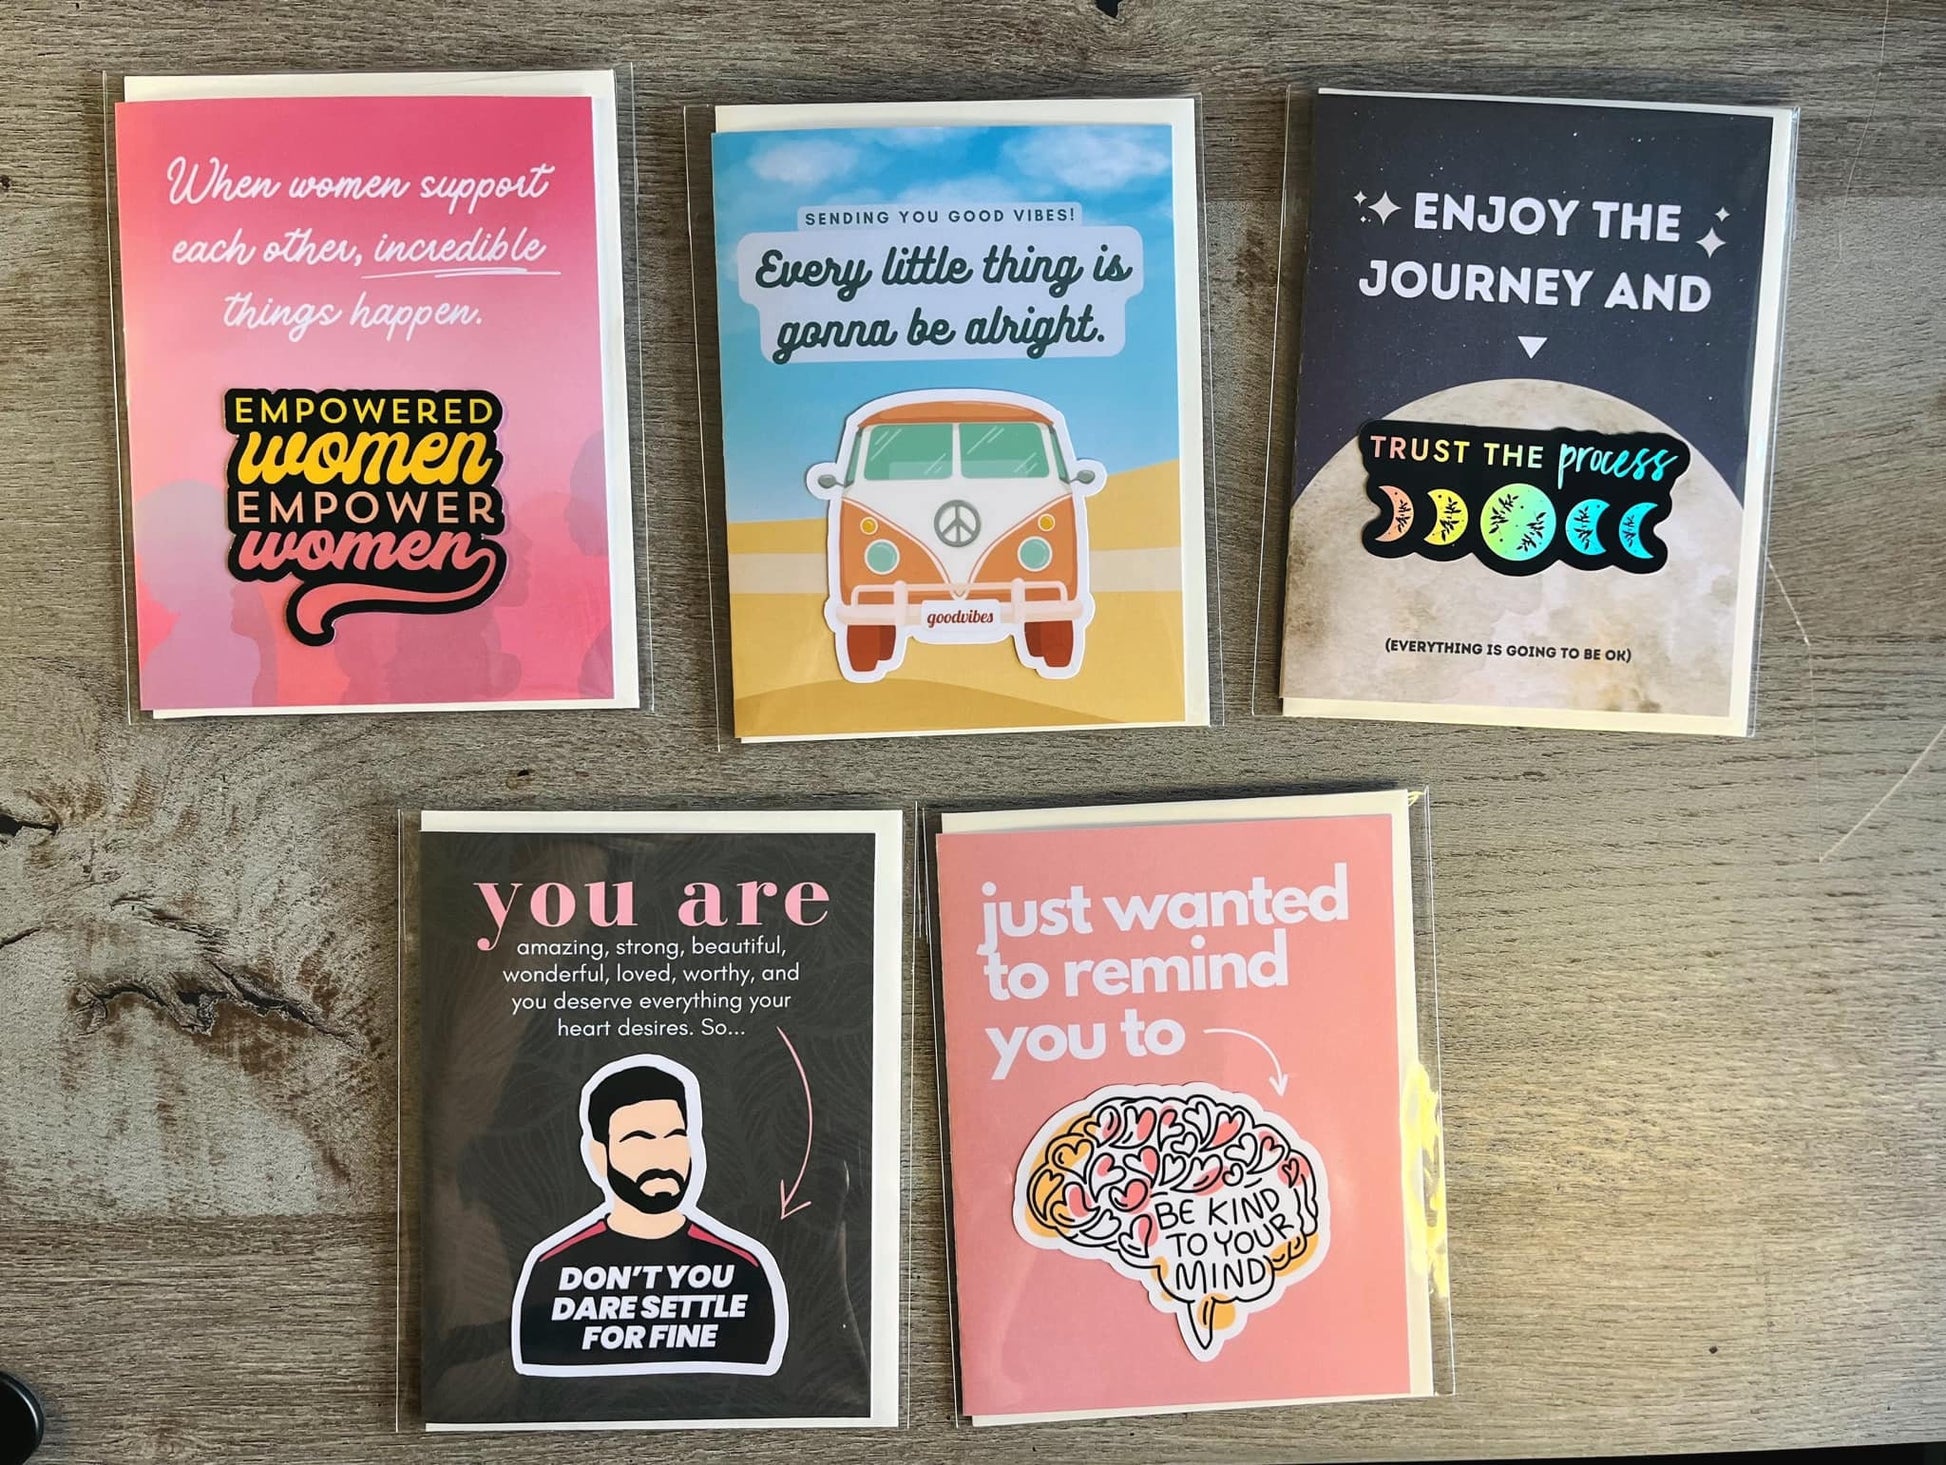 NEW! Be Kind to your Mind Sticker + Encouragement Card | Greeting Card | Encouragement Gift | Encouraging Sticker | Thinking of You